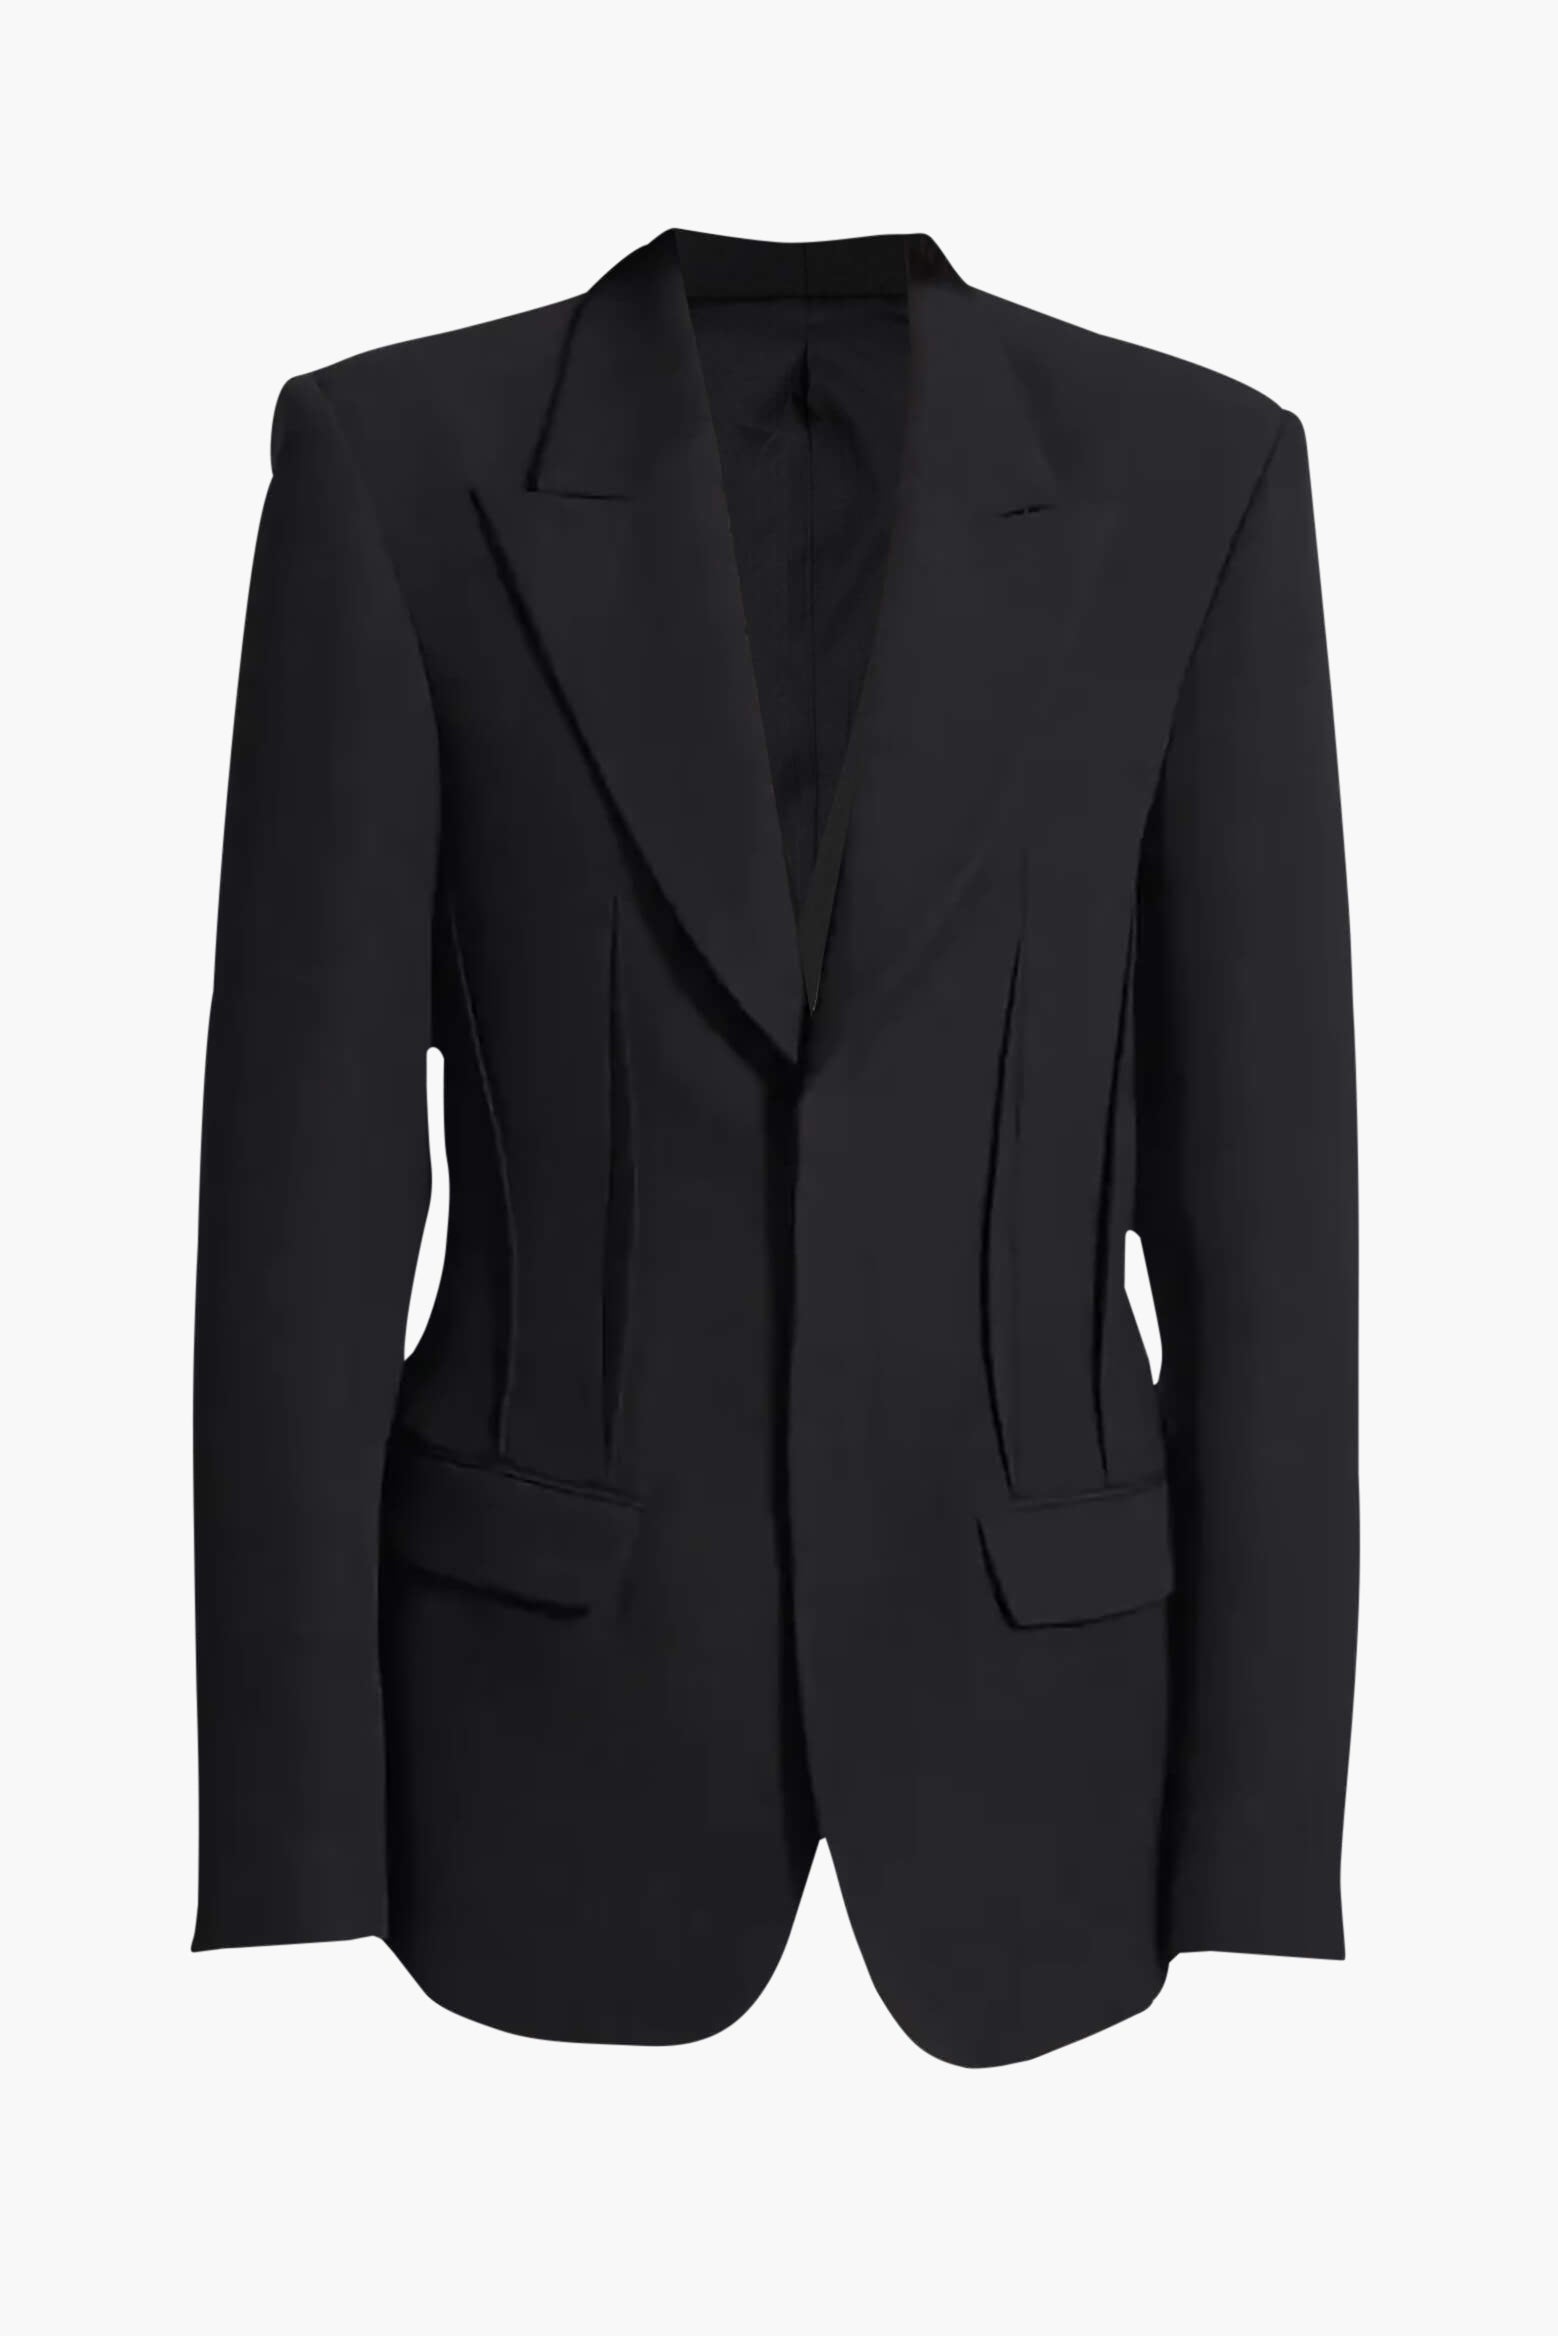 Dion Lee Darted Unisex Blazer in Black from The New Trend